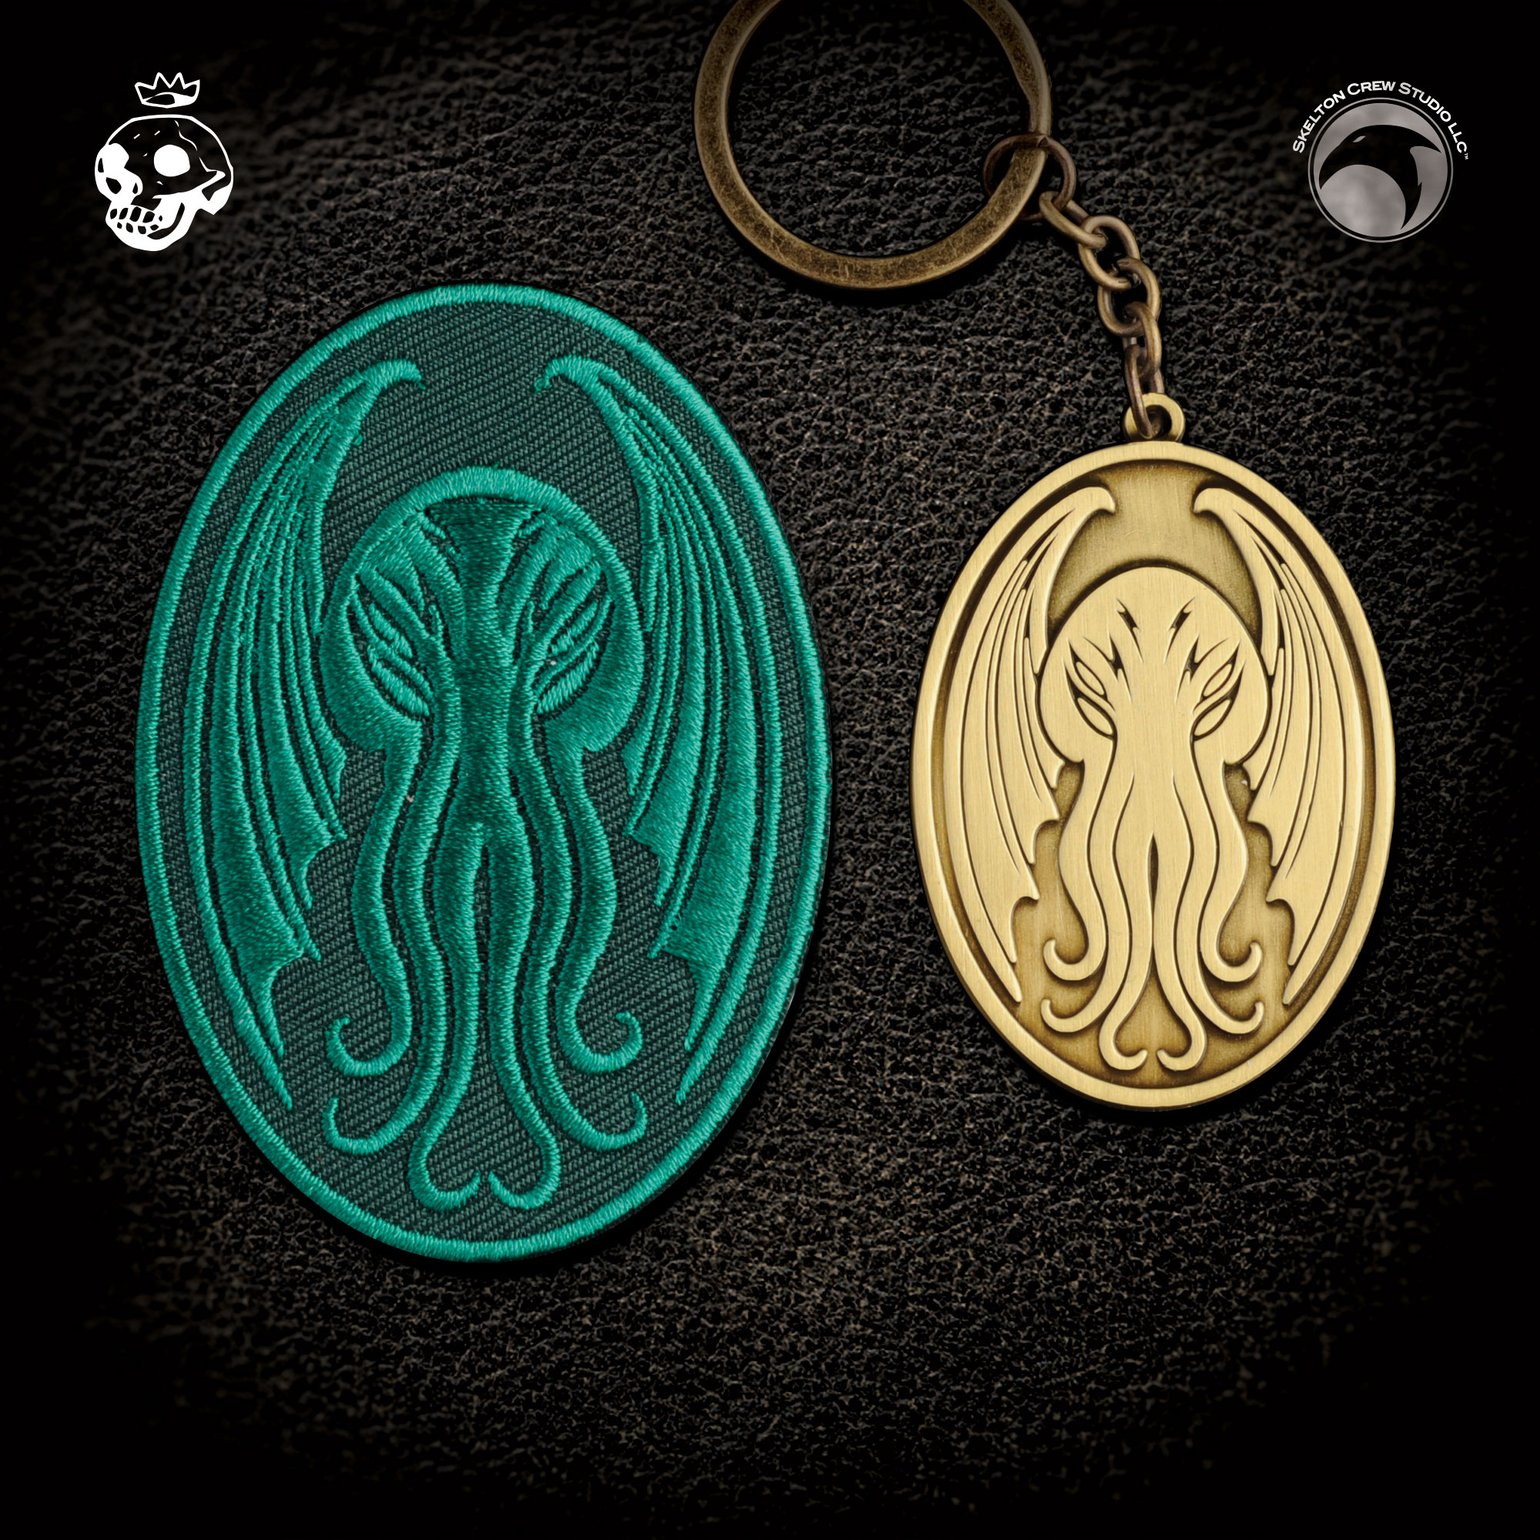 The Skelton Crew Collection: Cthulhu patch & keychain set!